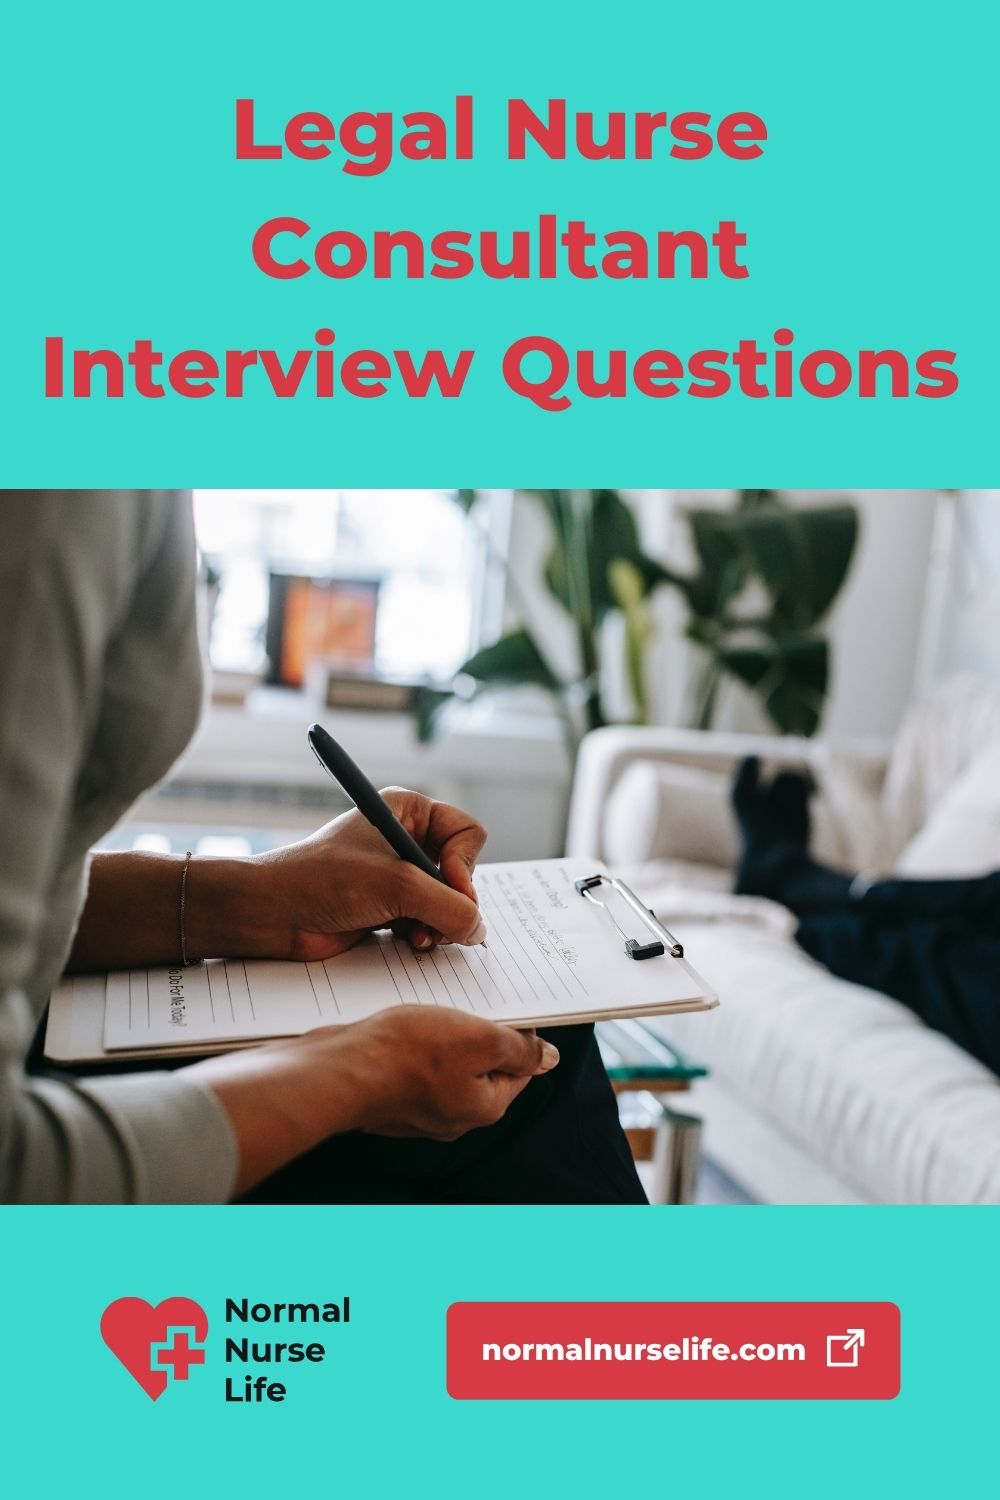 Interview questions for legal nurse consultant